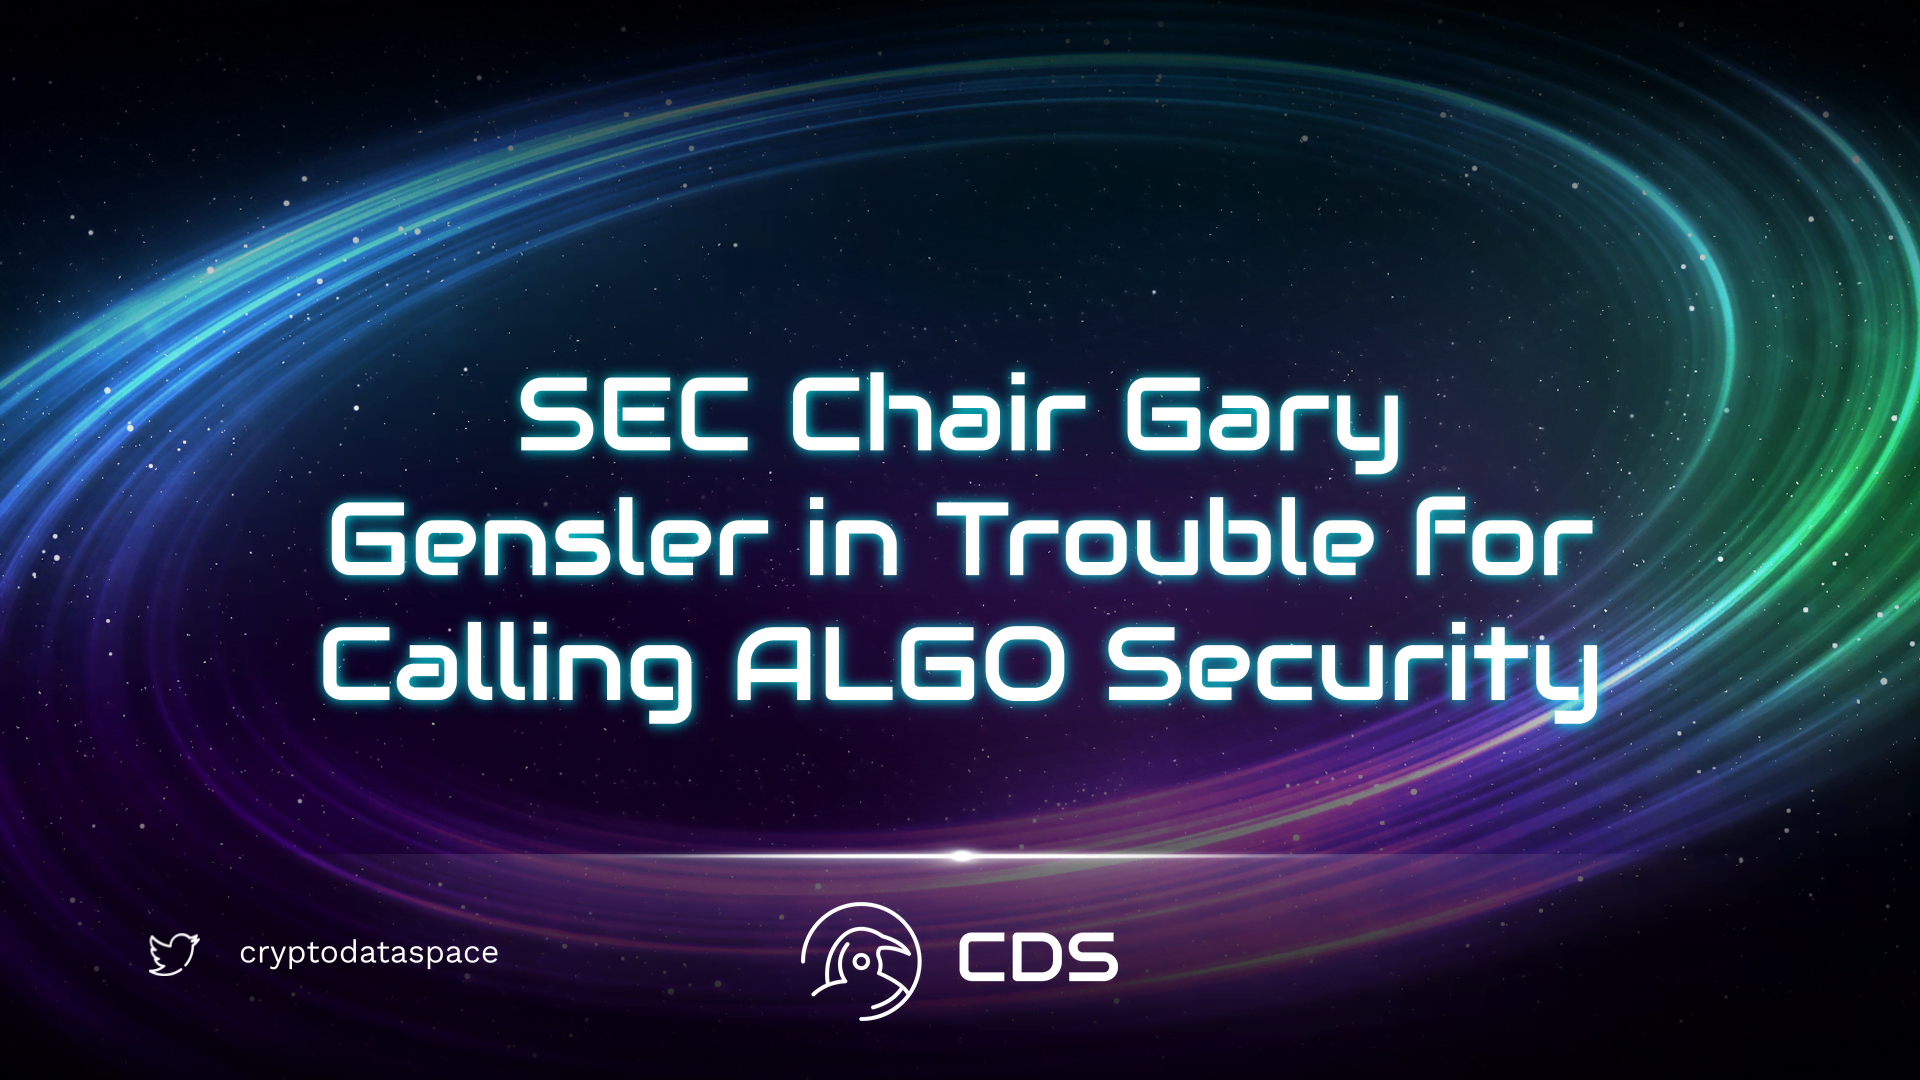 SEC Chair Gary Gensler in Trouble for Calling ALGO Security